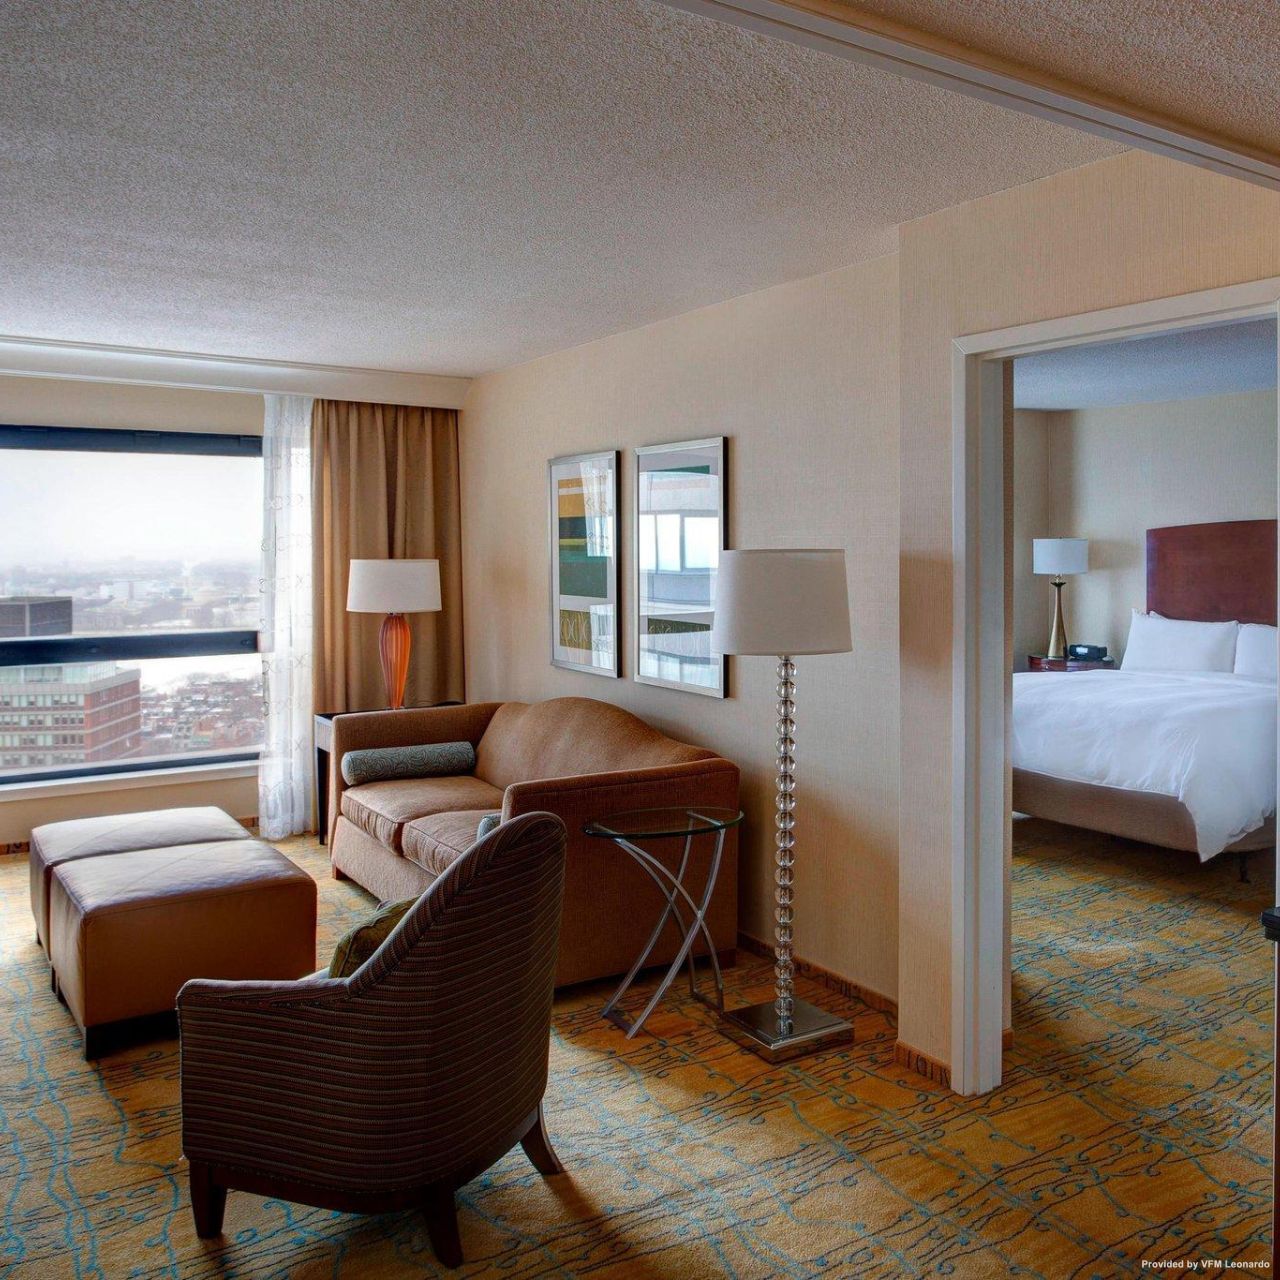 Hotel Boston Marriott Copley Place - Great prices at HOTEL INFO